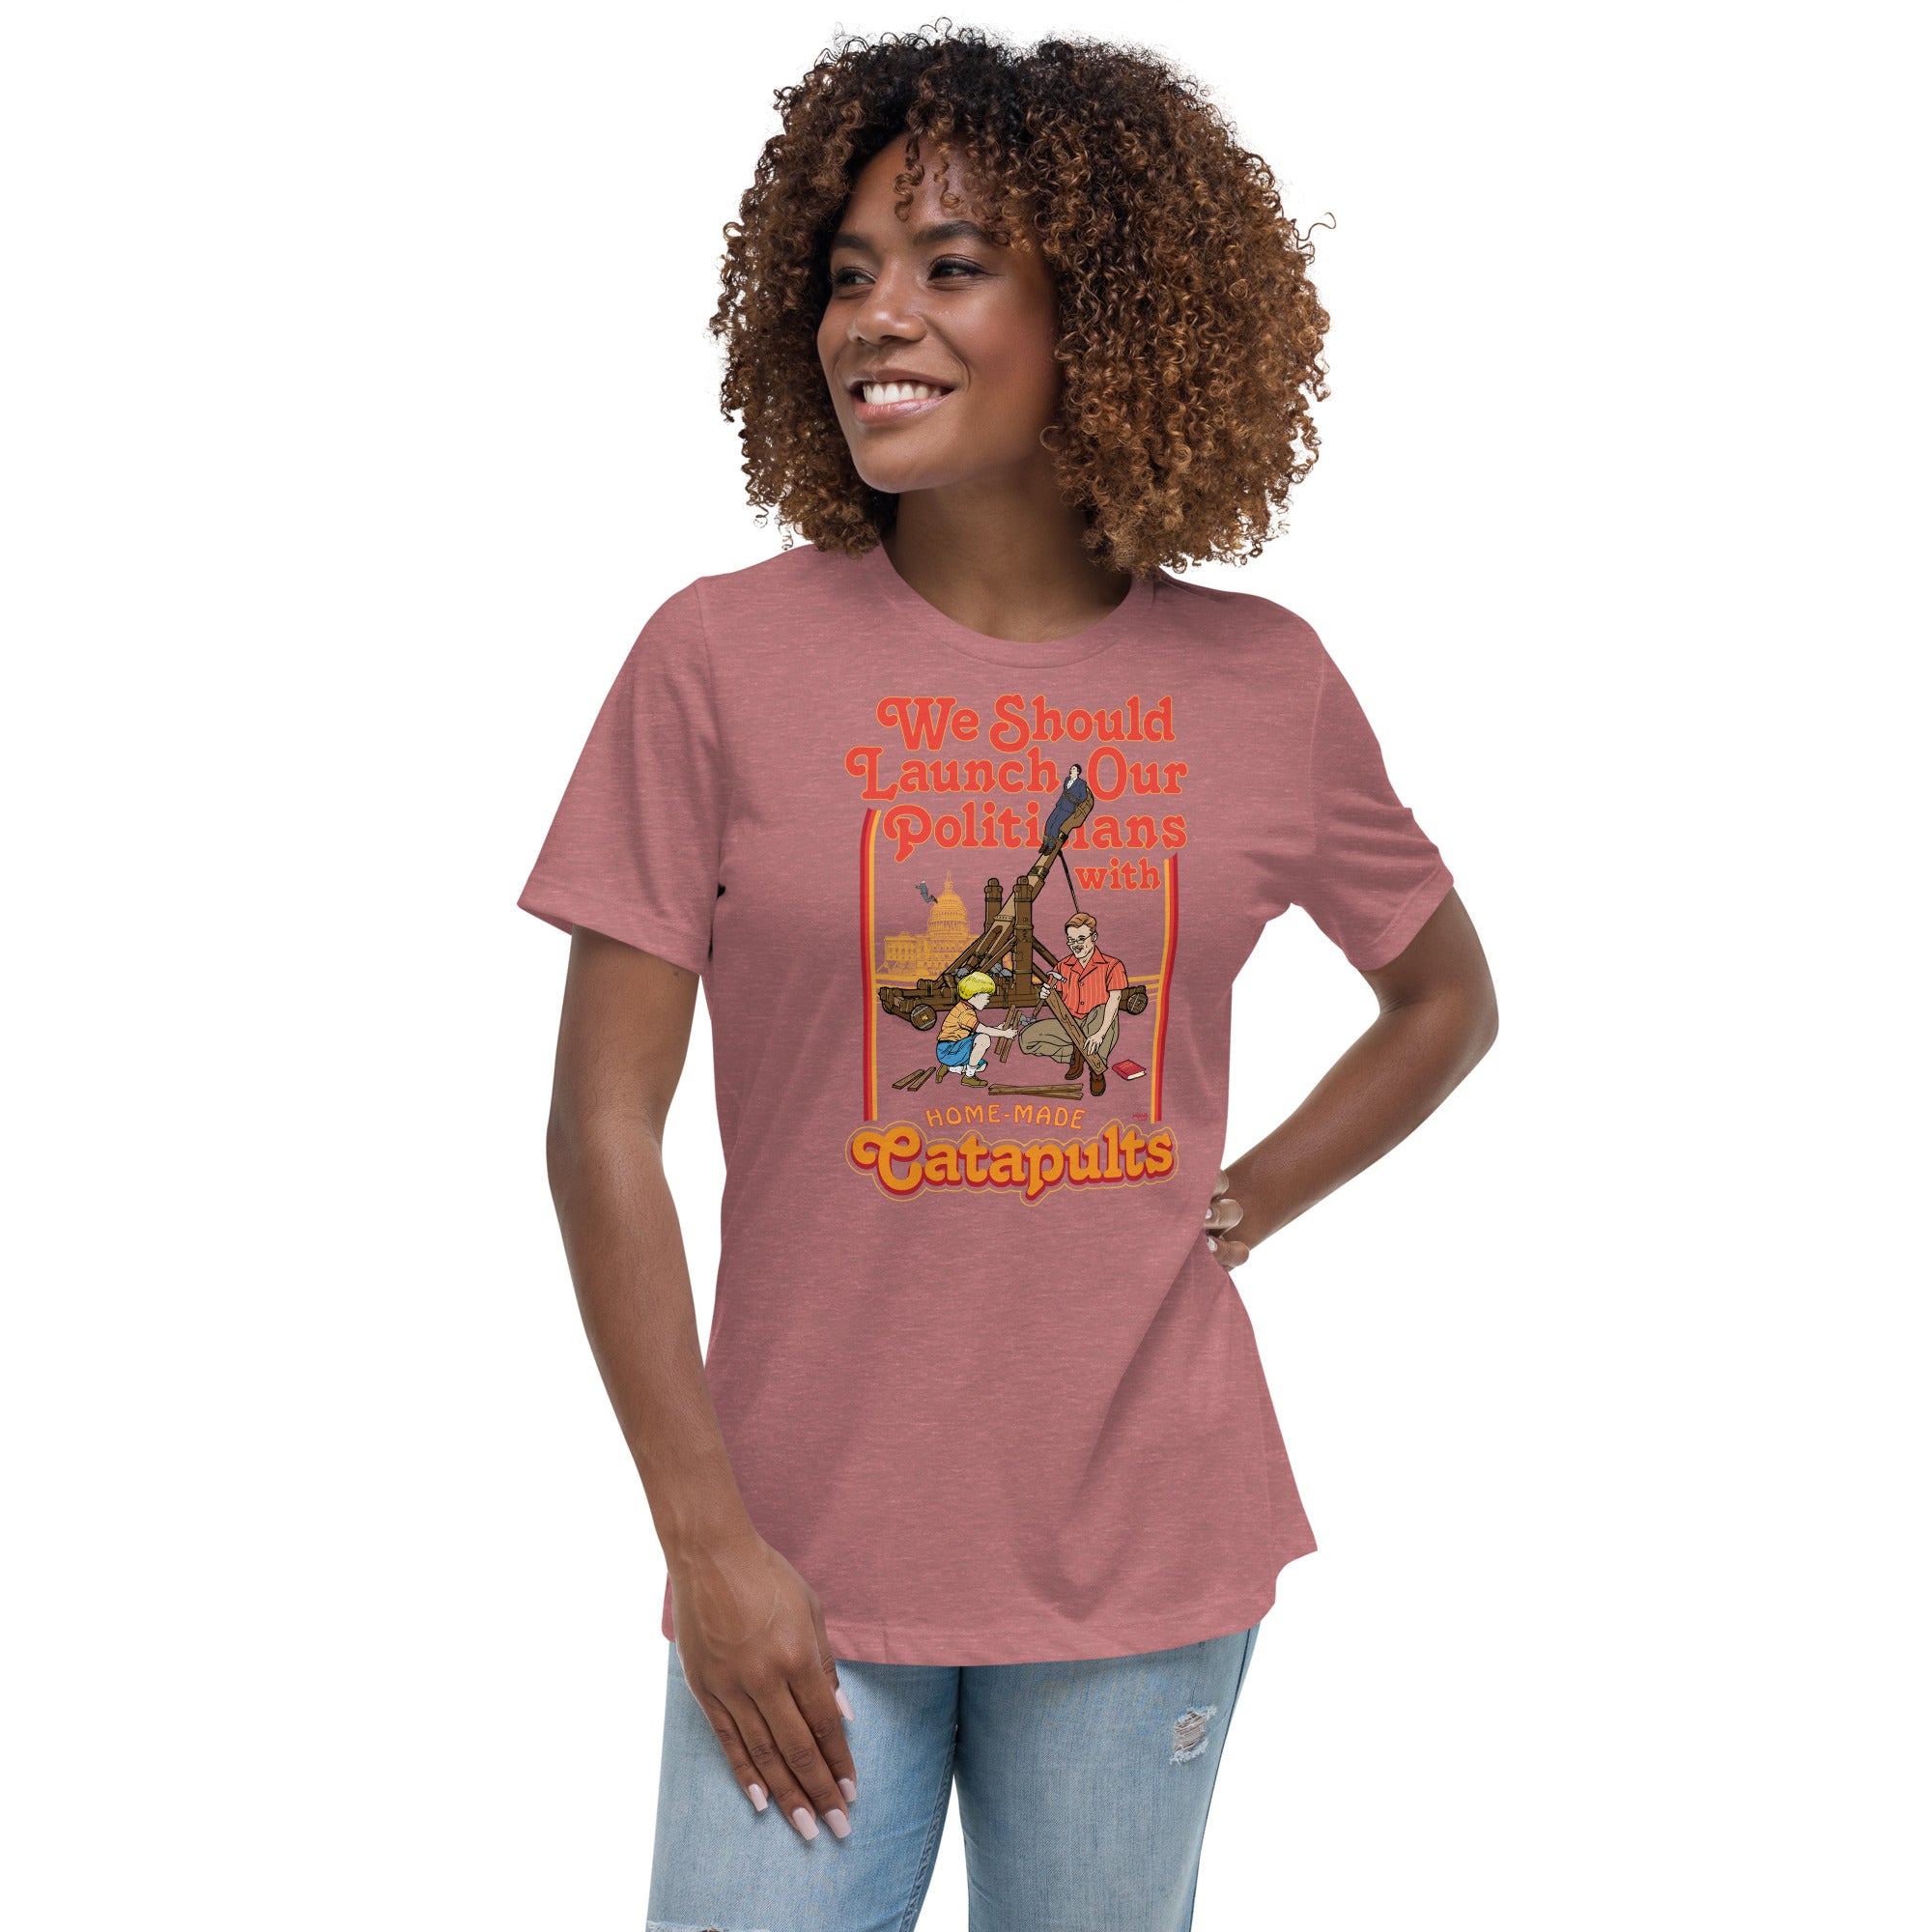 We Should Launch Our Politicians with Homemade Catapults Women's Relaxed T-Shirt